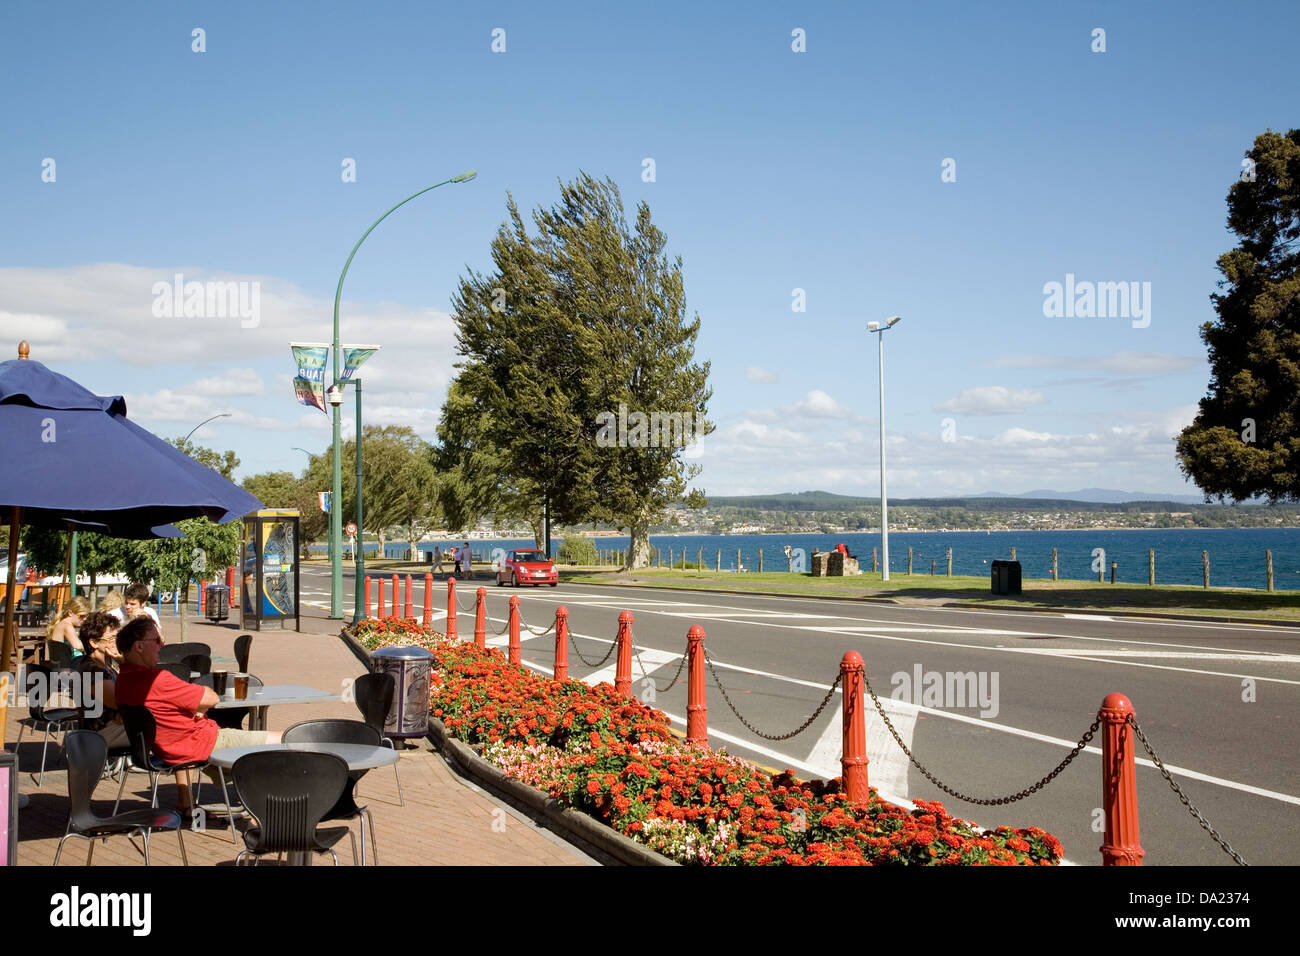 The neatly manicured and visitor friendly town of Taupo nestles on the shores of volcanically formed Lake Taupo, New Zealand. Stock Photo